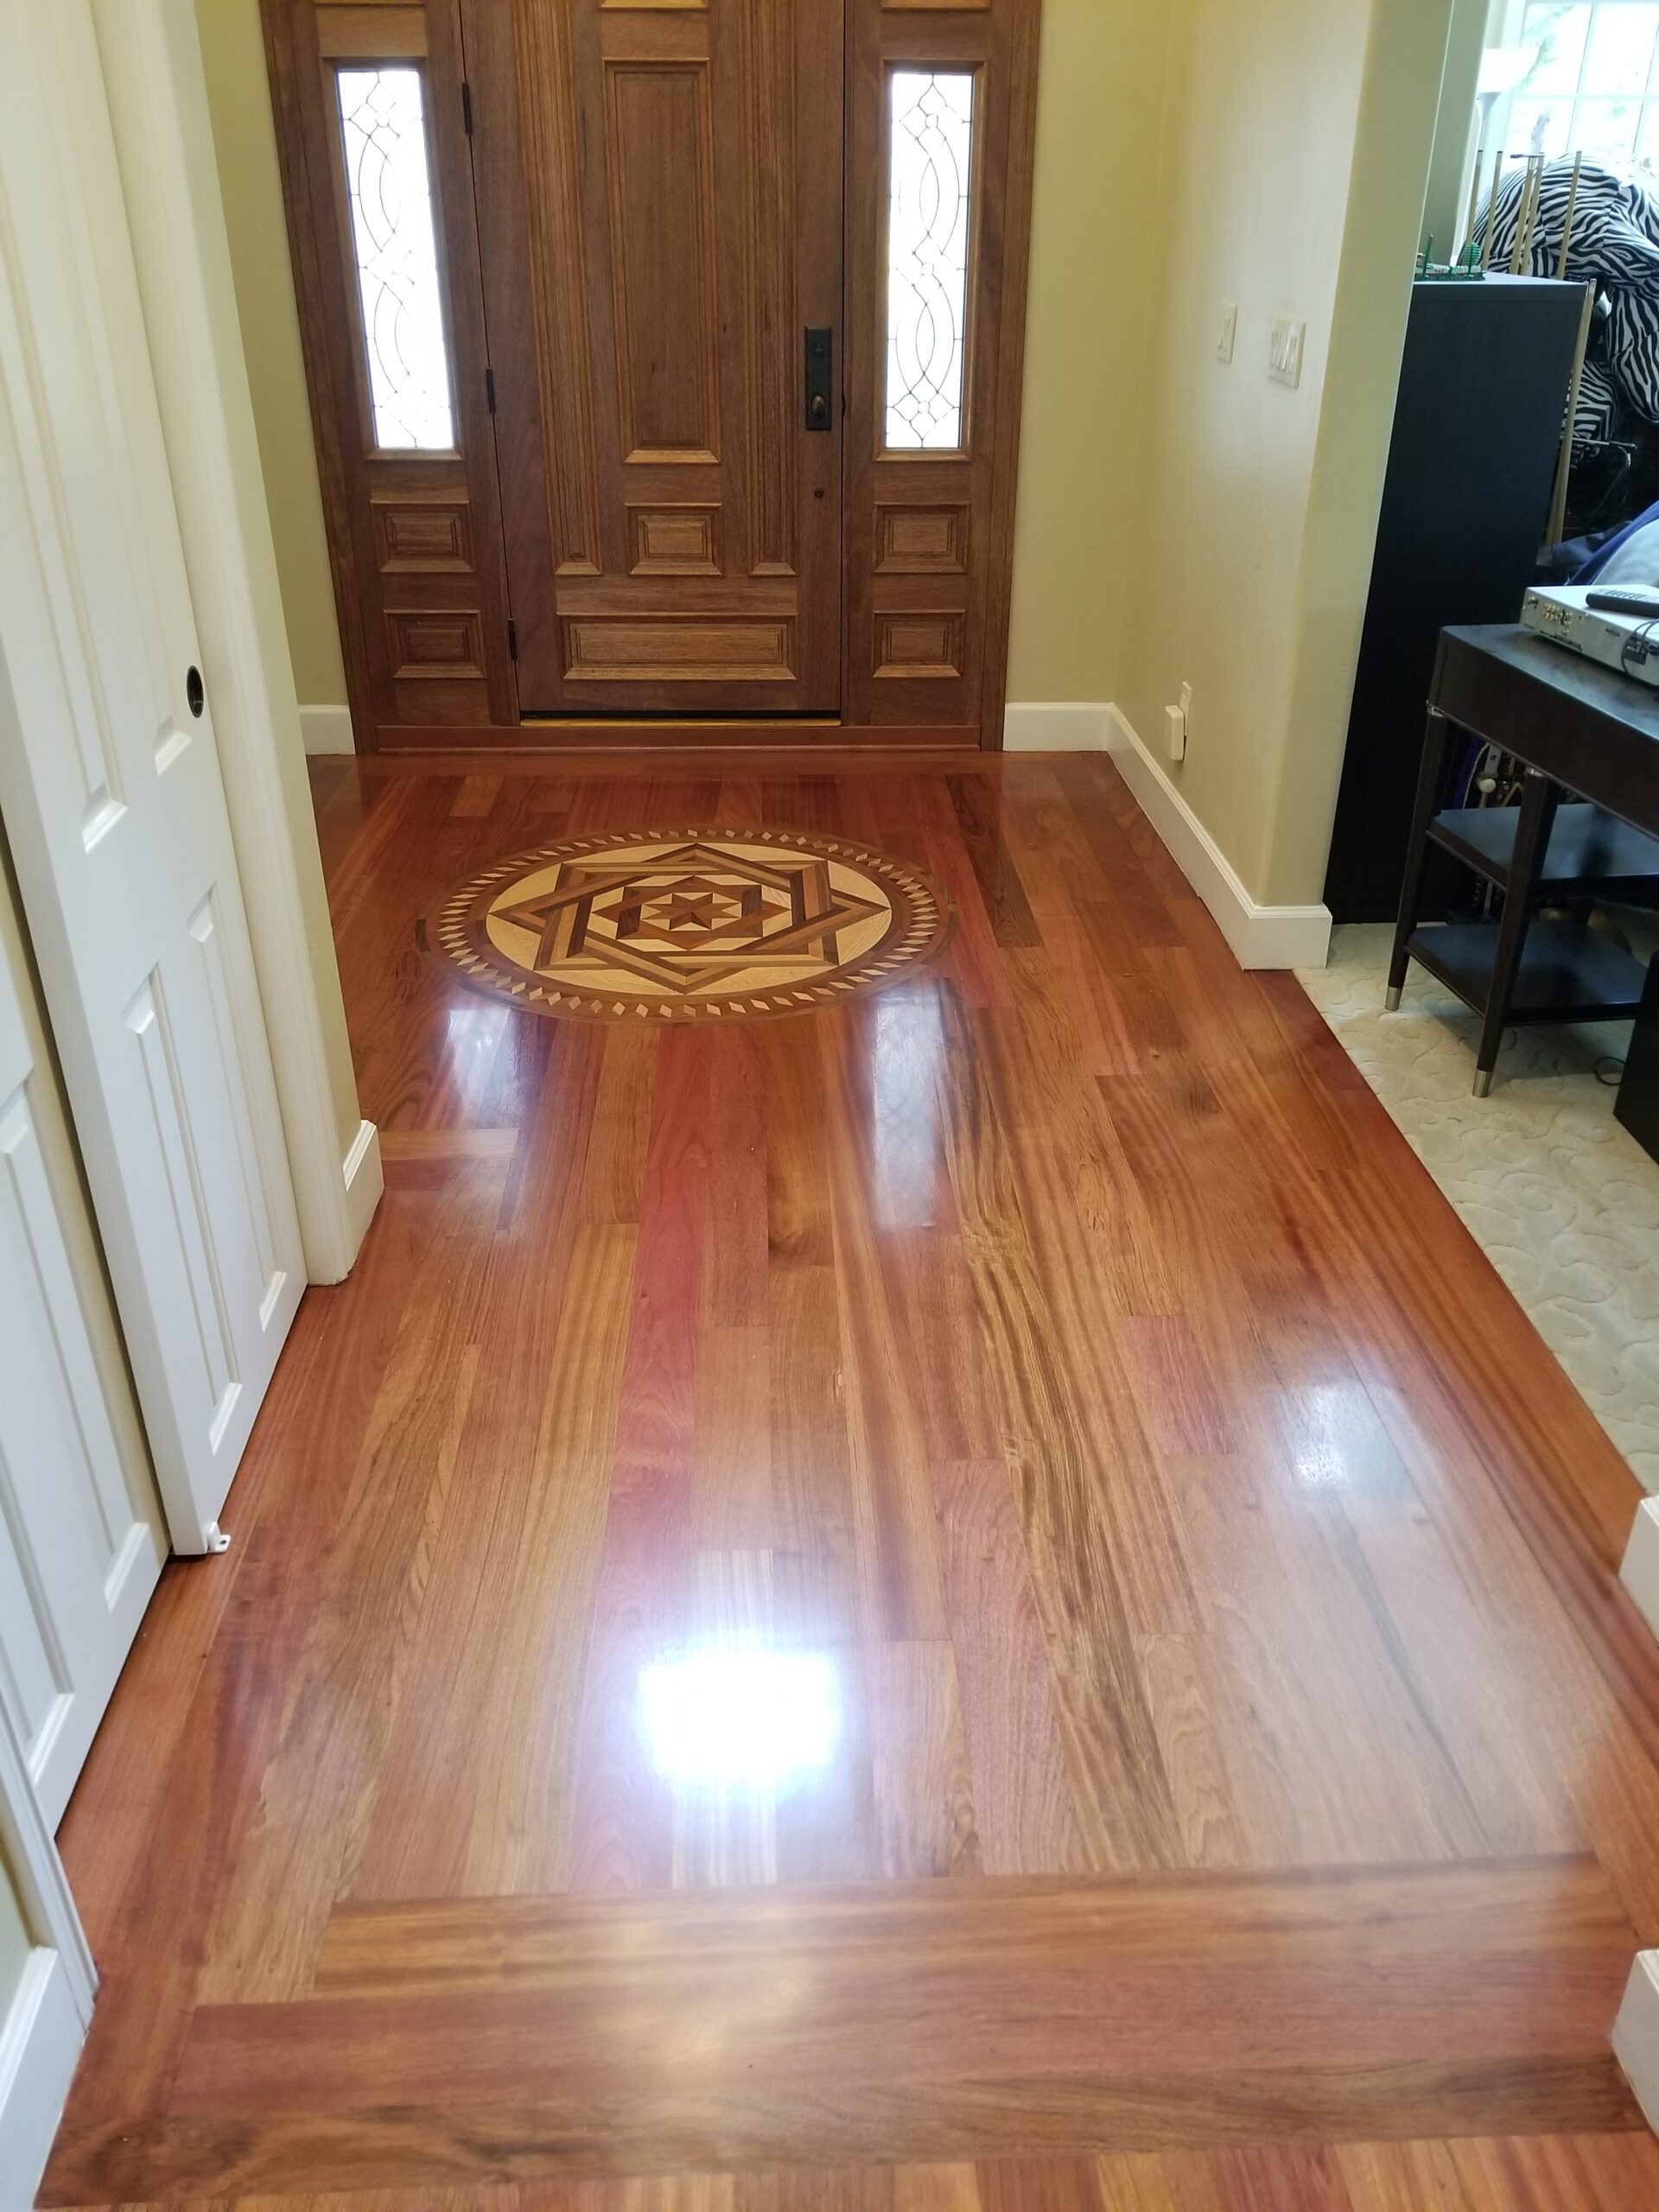 Brazilian cherry wood flooring adds beauty to the entryway ad value to this Palo Alto residence.